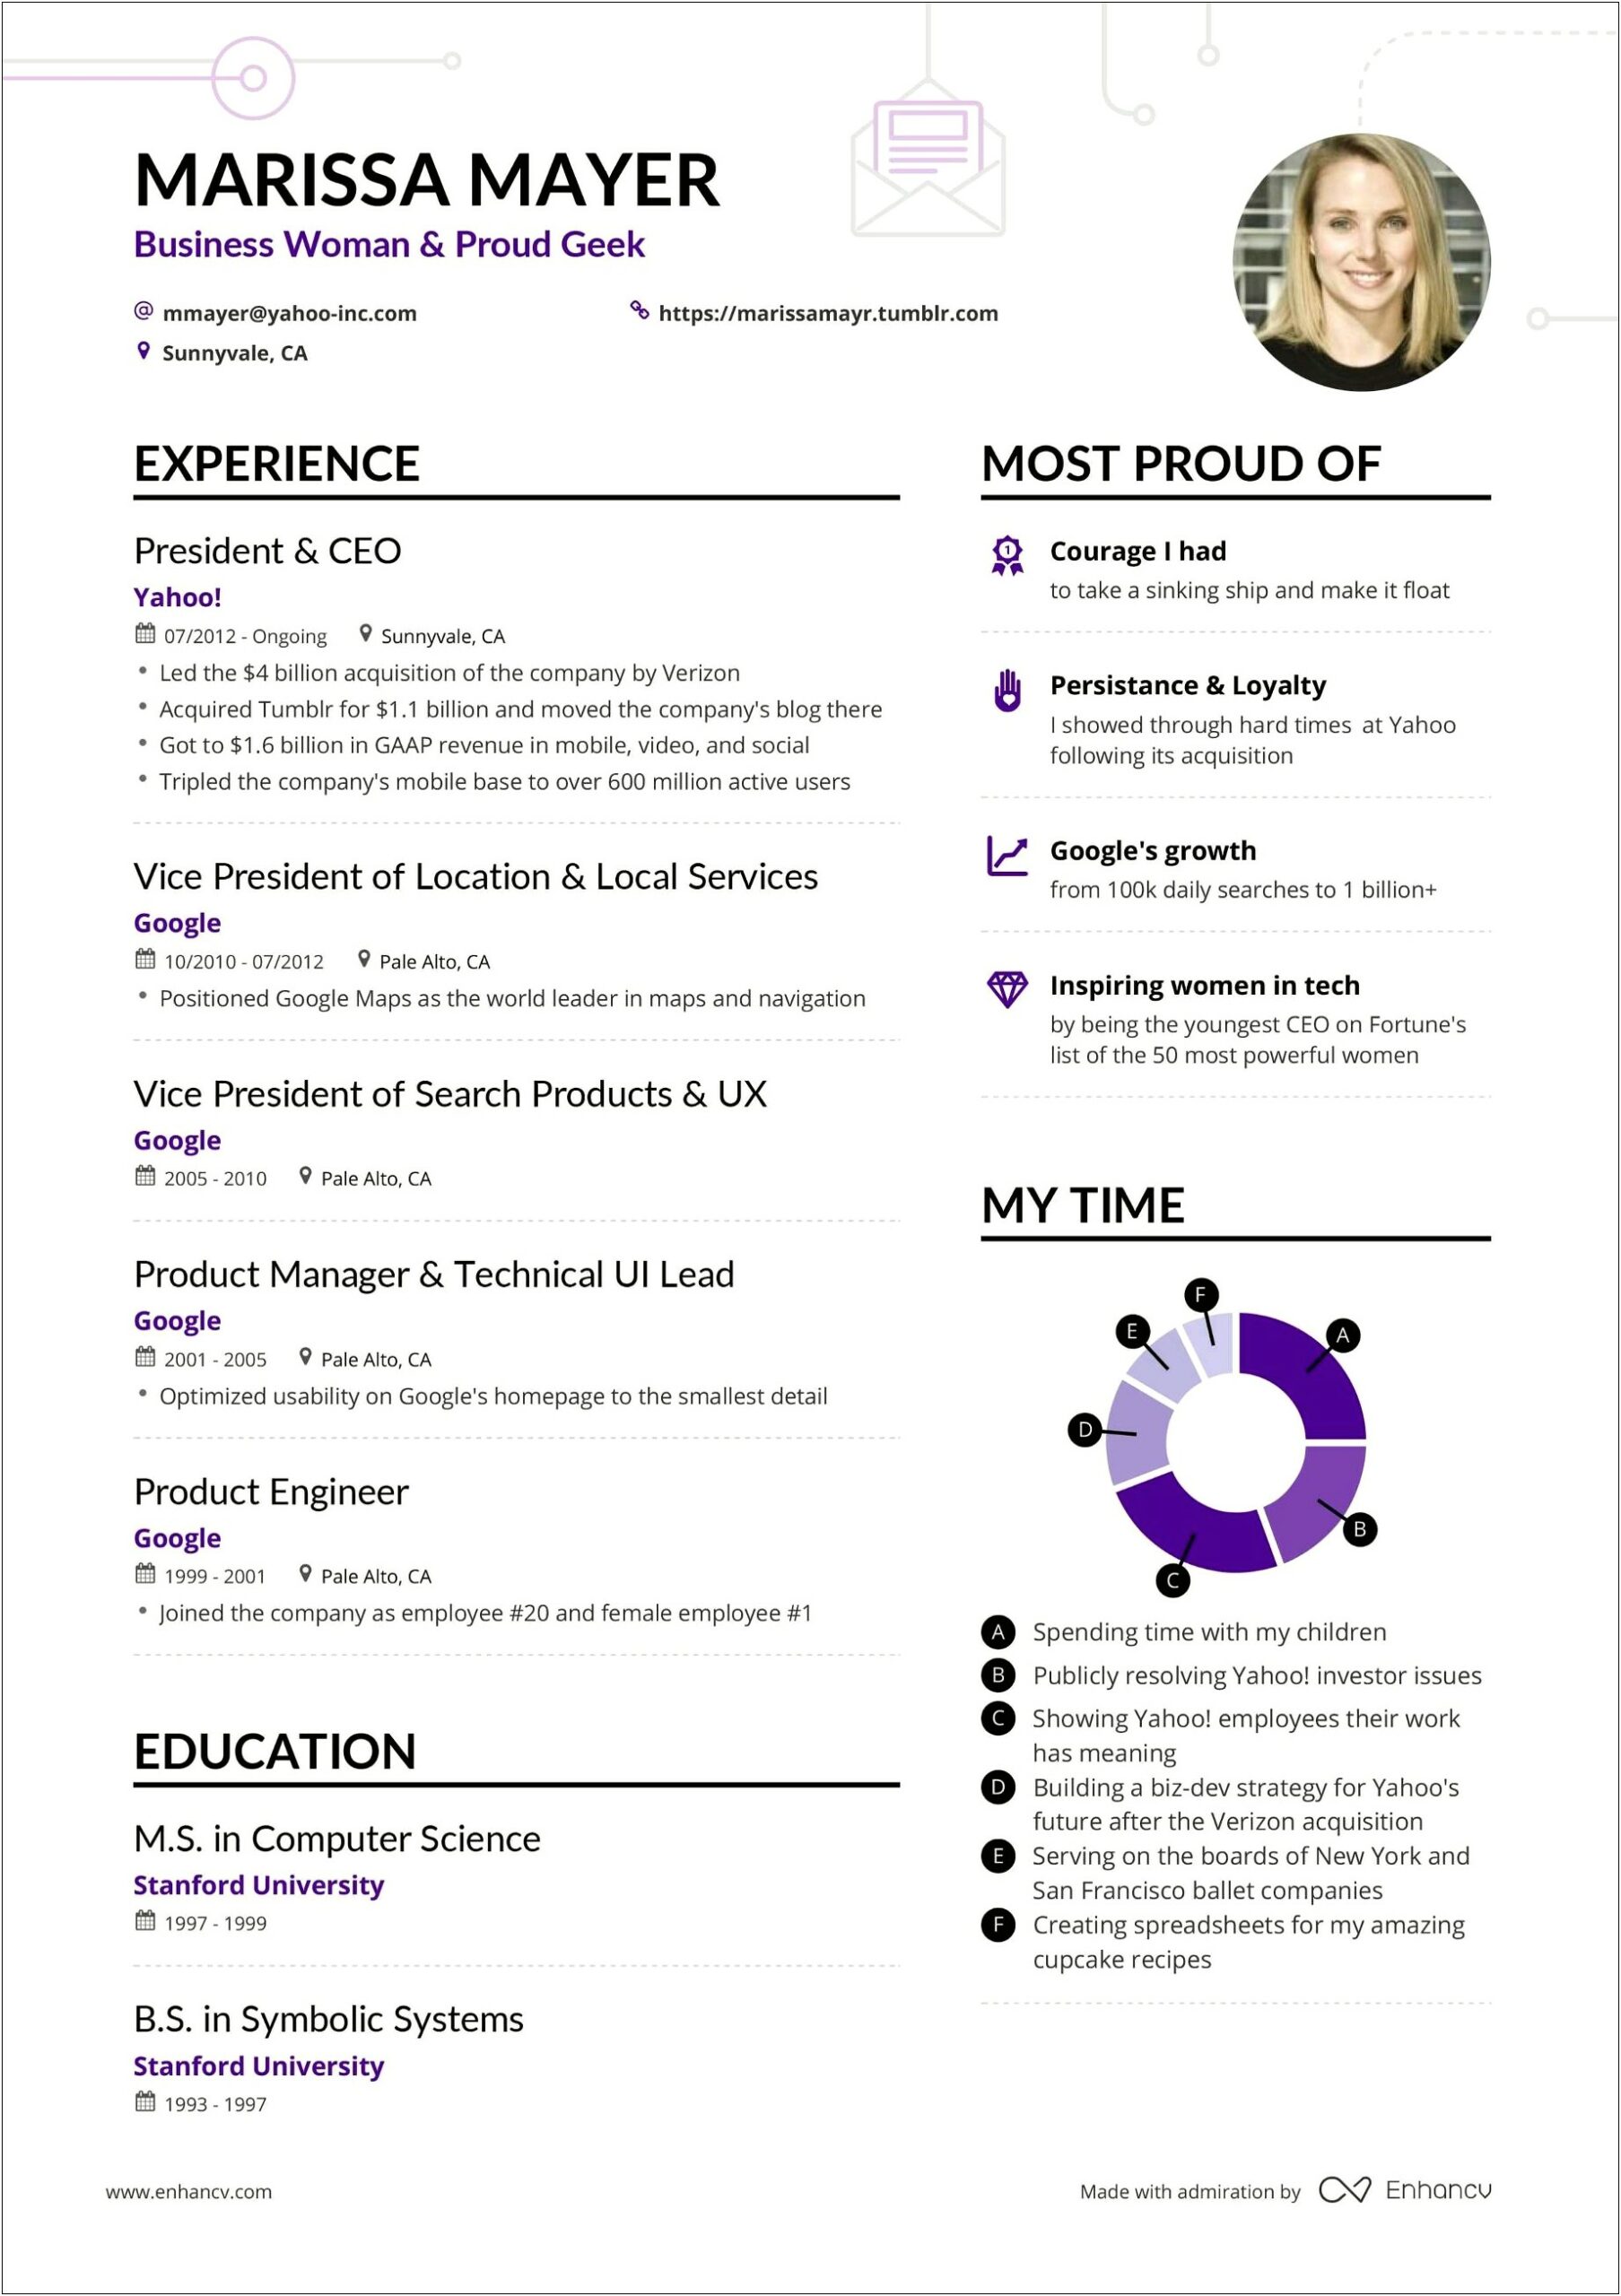 Best Resume I Have Seen Yahoo